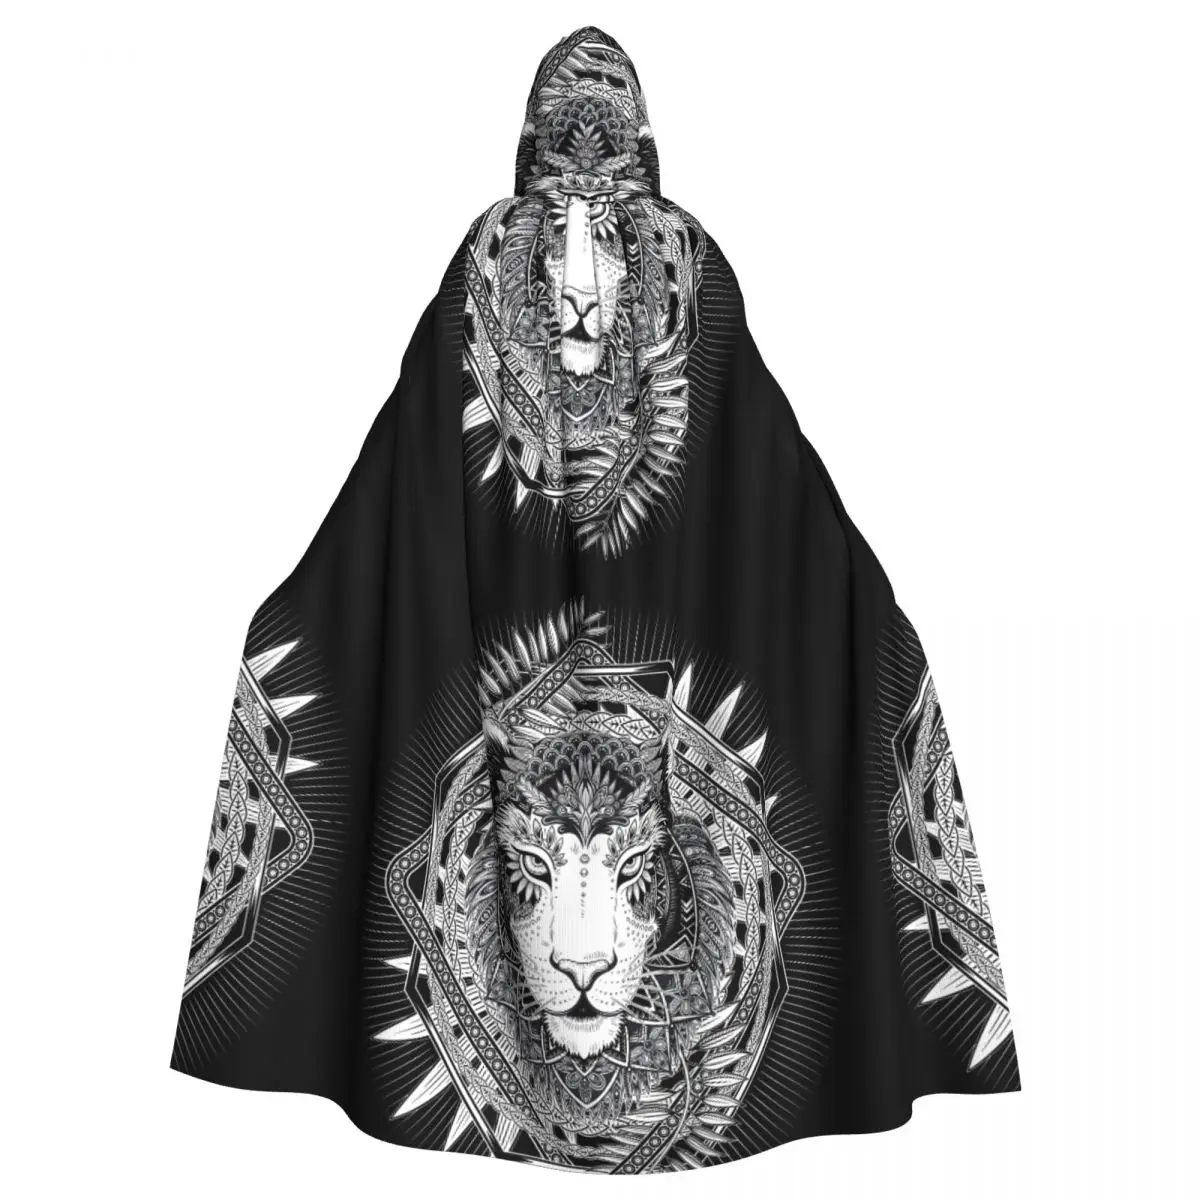 

Hooded Cloak Polyester Unisex Witch Cape Costume AccessoryBlack And White Tattoo Tiger Face